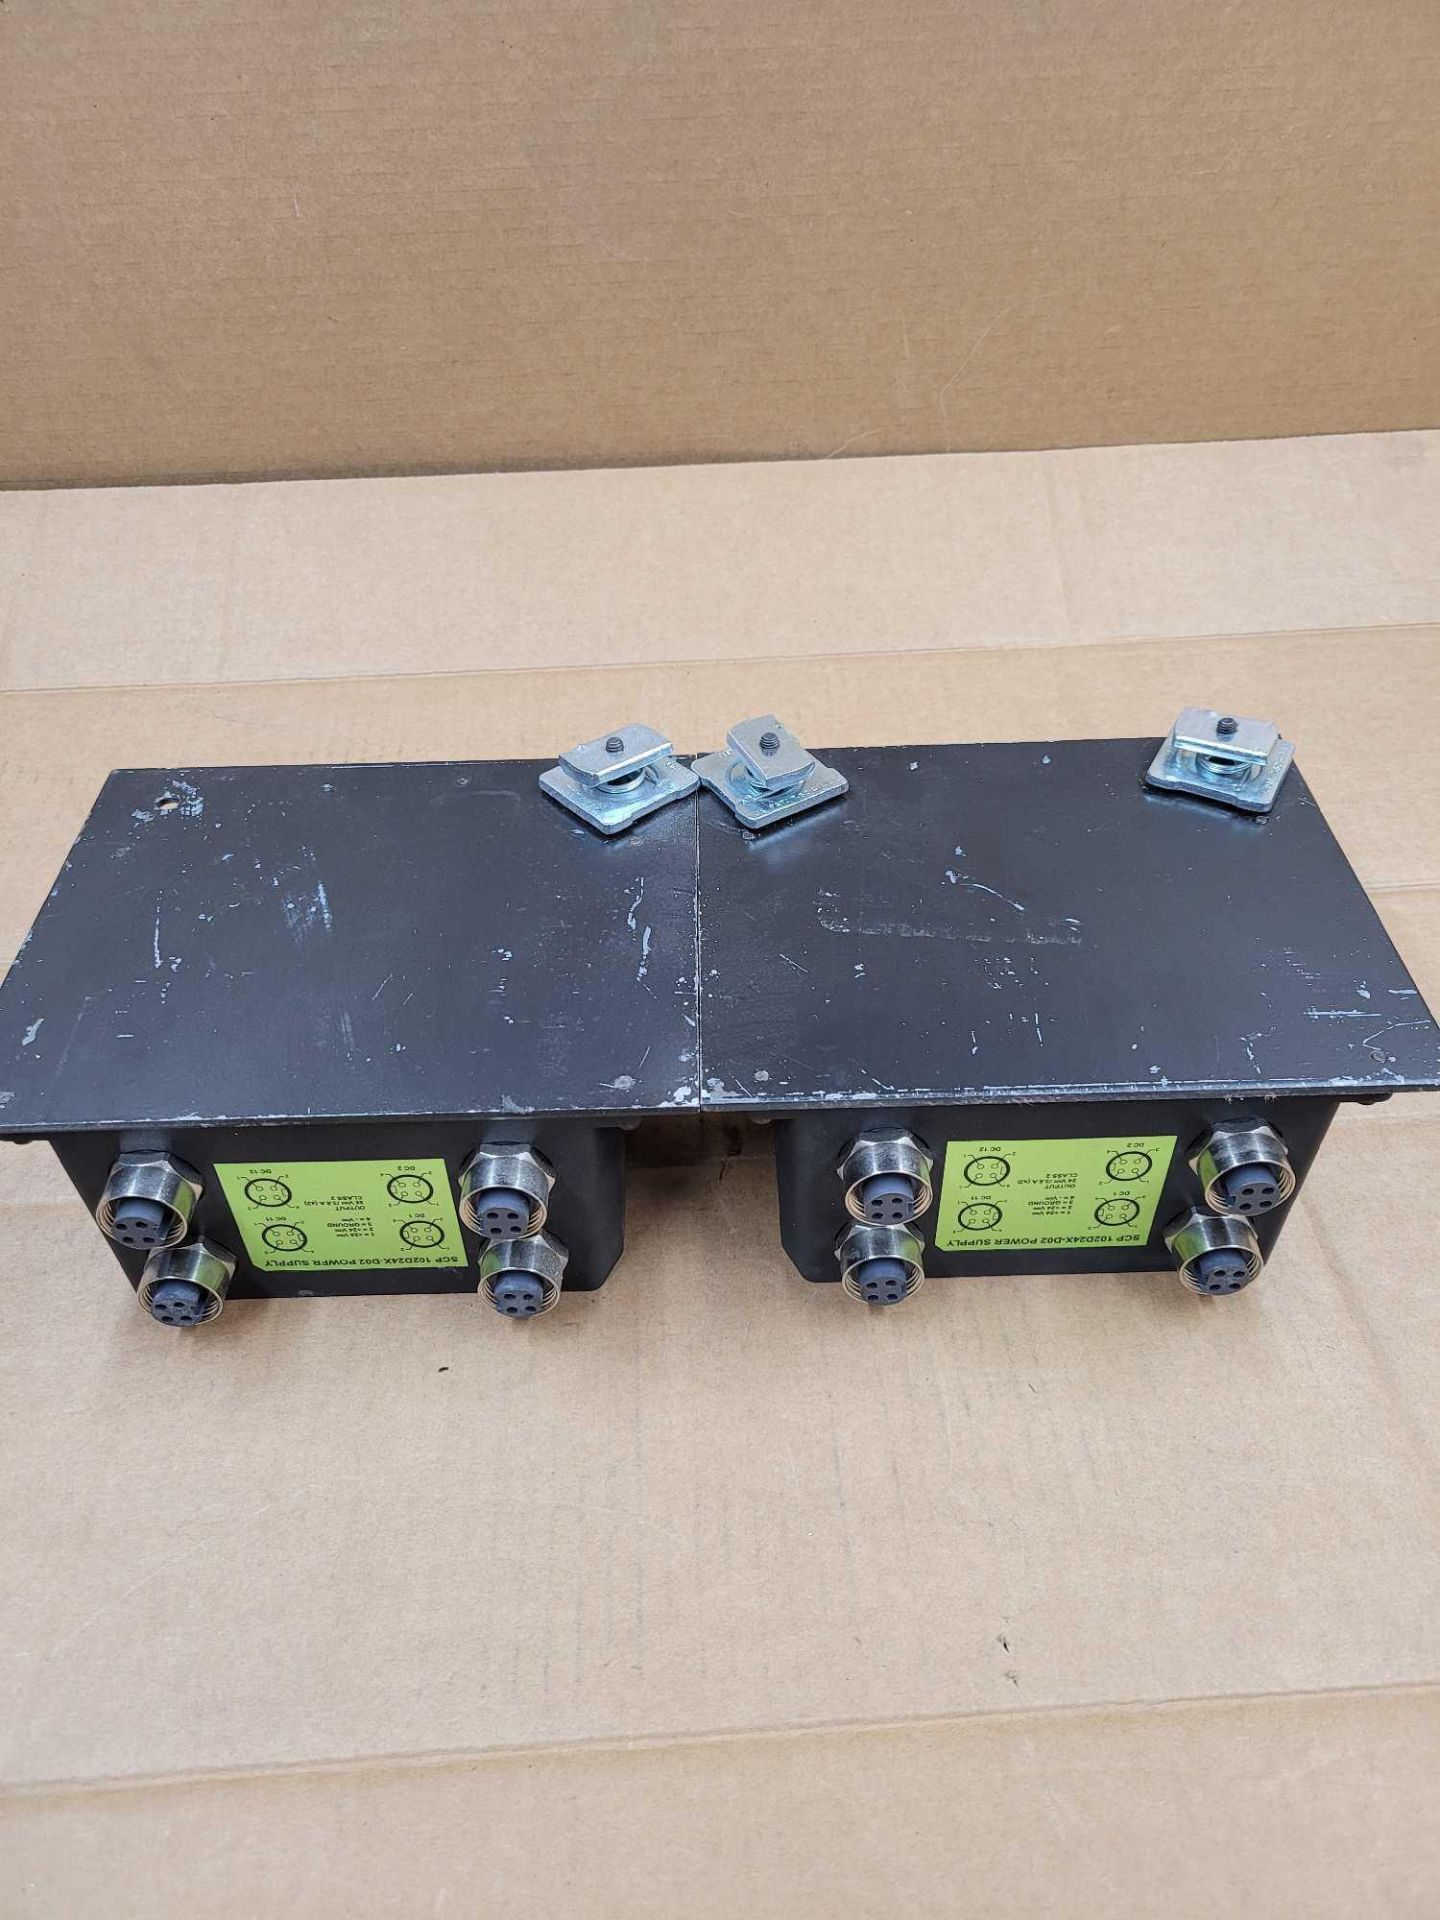 LOT OF 2 SOLA SCP 102D24X-D02 / Power Supply  /  Lot Weight: 12.4 lbs - Image 8 of 8